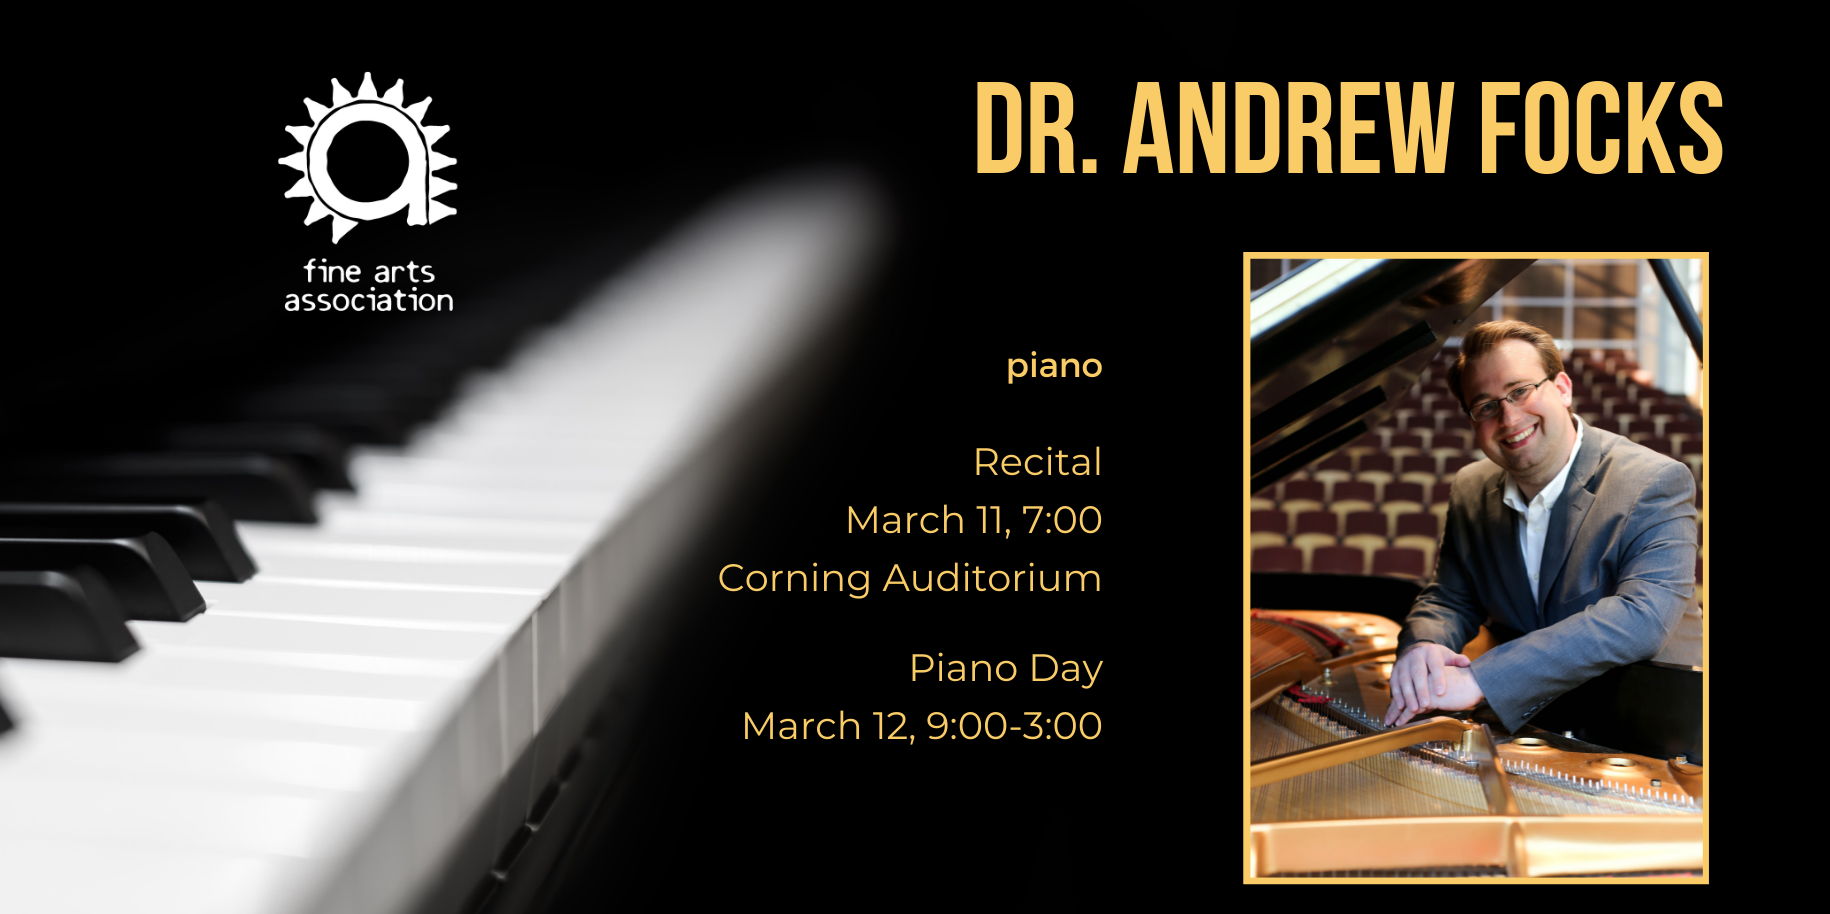 Andrew Focks Piano Concert promotional image